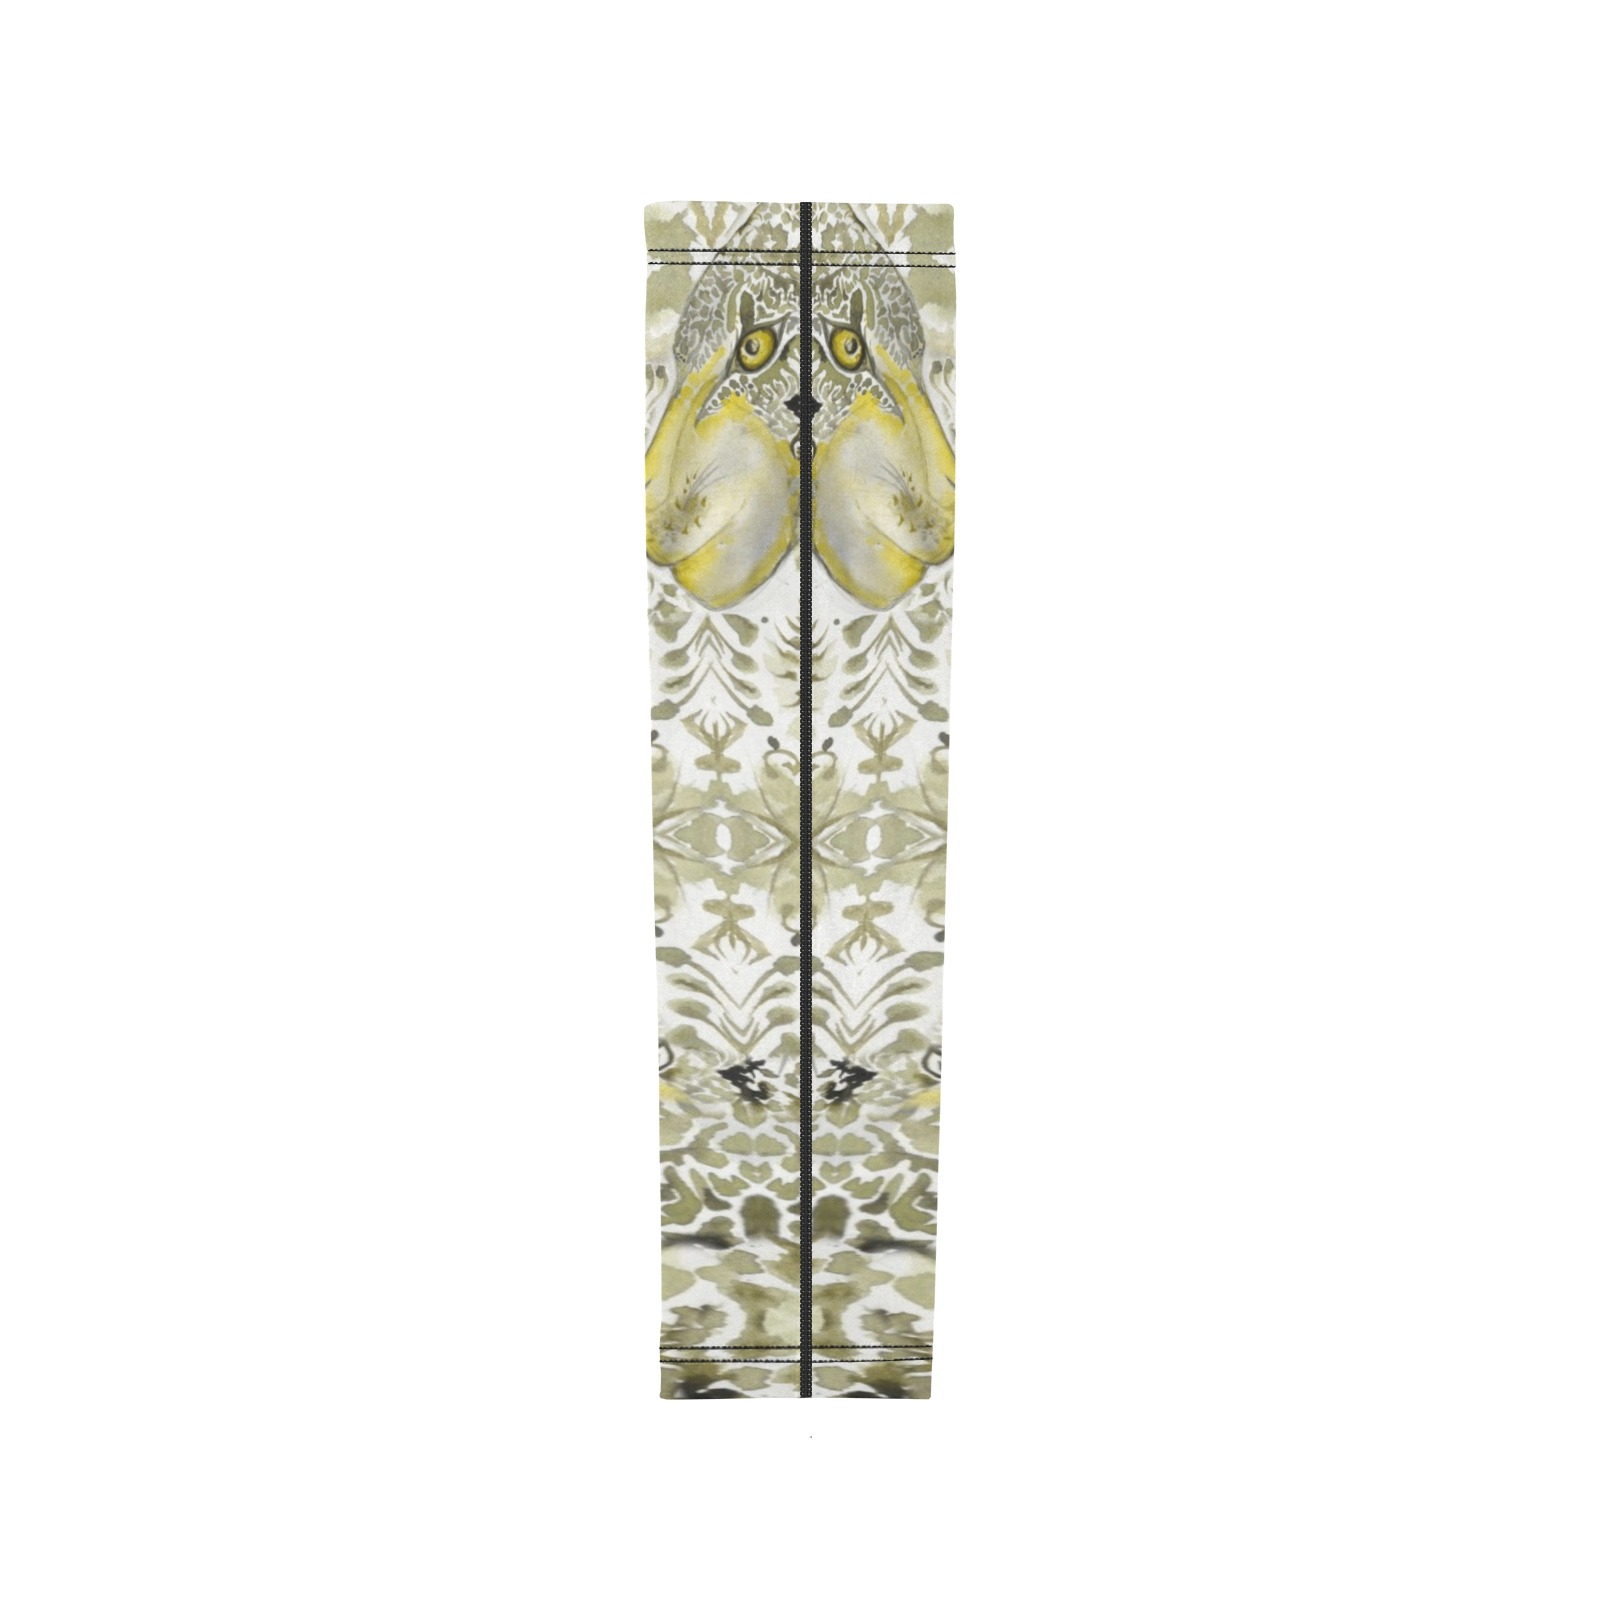 Nidhi December 2014-pattern 4-yellow-44x55 inches Arm Sleeves (Set of Two)